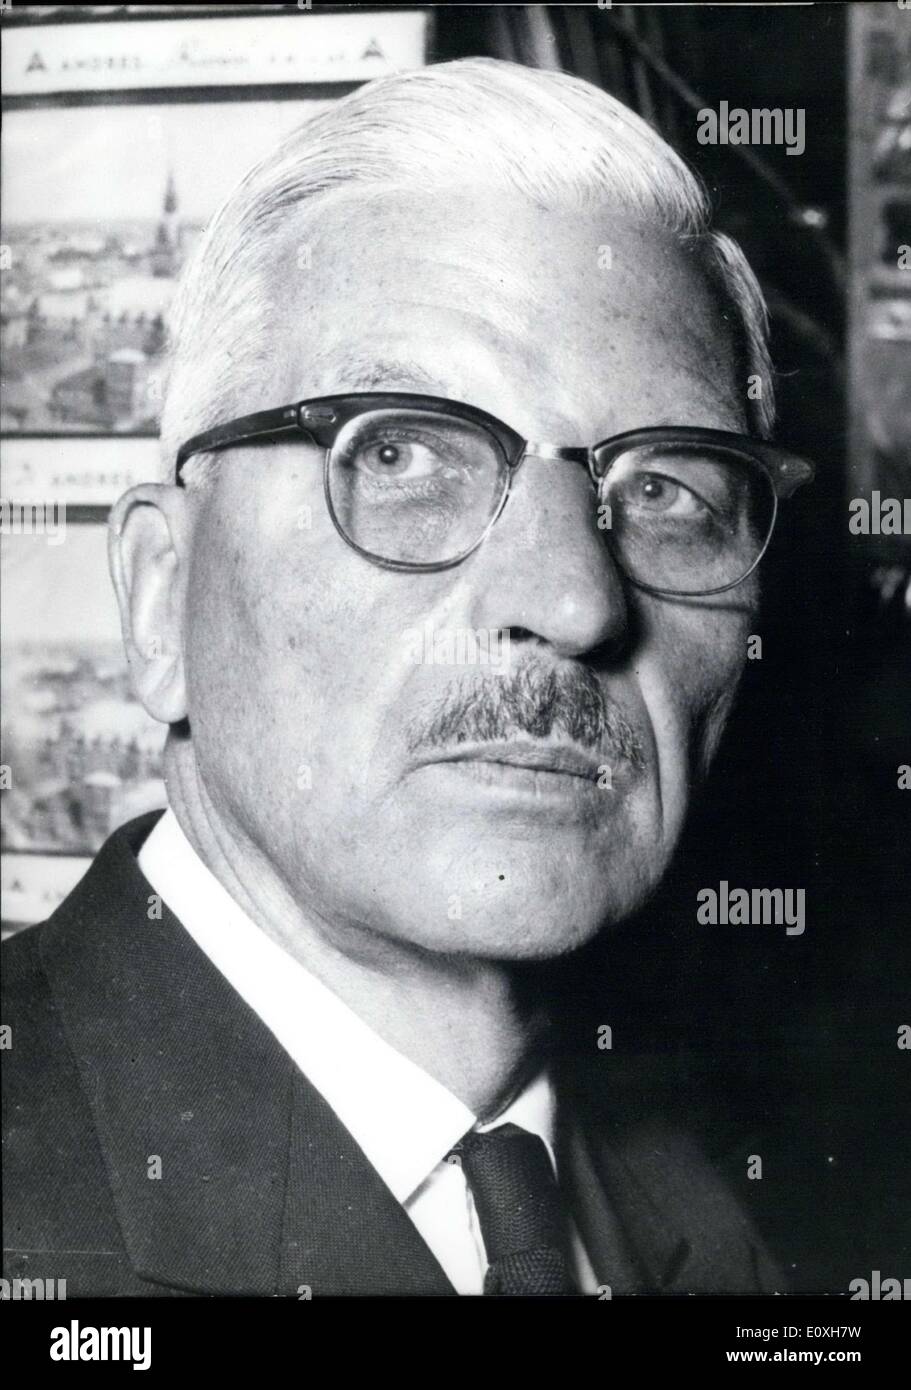 Dec. 29, 1966 - Pictured is former Austrian chancellor Kurt von Schuschnigg. He returned to Austria at the beginning of 1967 after living in exile in the United States for 21 years. He wanted to return to the Innsbruck region where he wanted to spend his remaining years. Schuschnigg was imprisoned by Hitler after the annexation of Austria when he refused to work with the Nazis. After being freed by American troops from the Dachau prison camp he went to the United States. Stock Photo